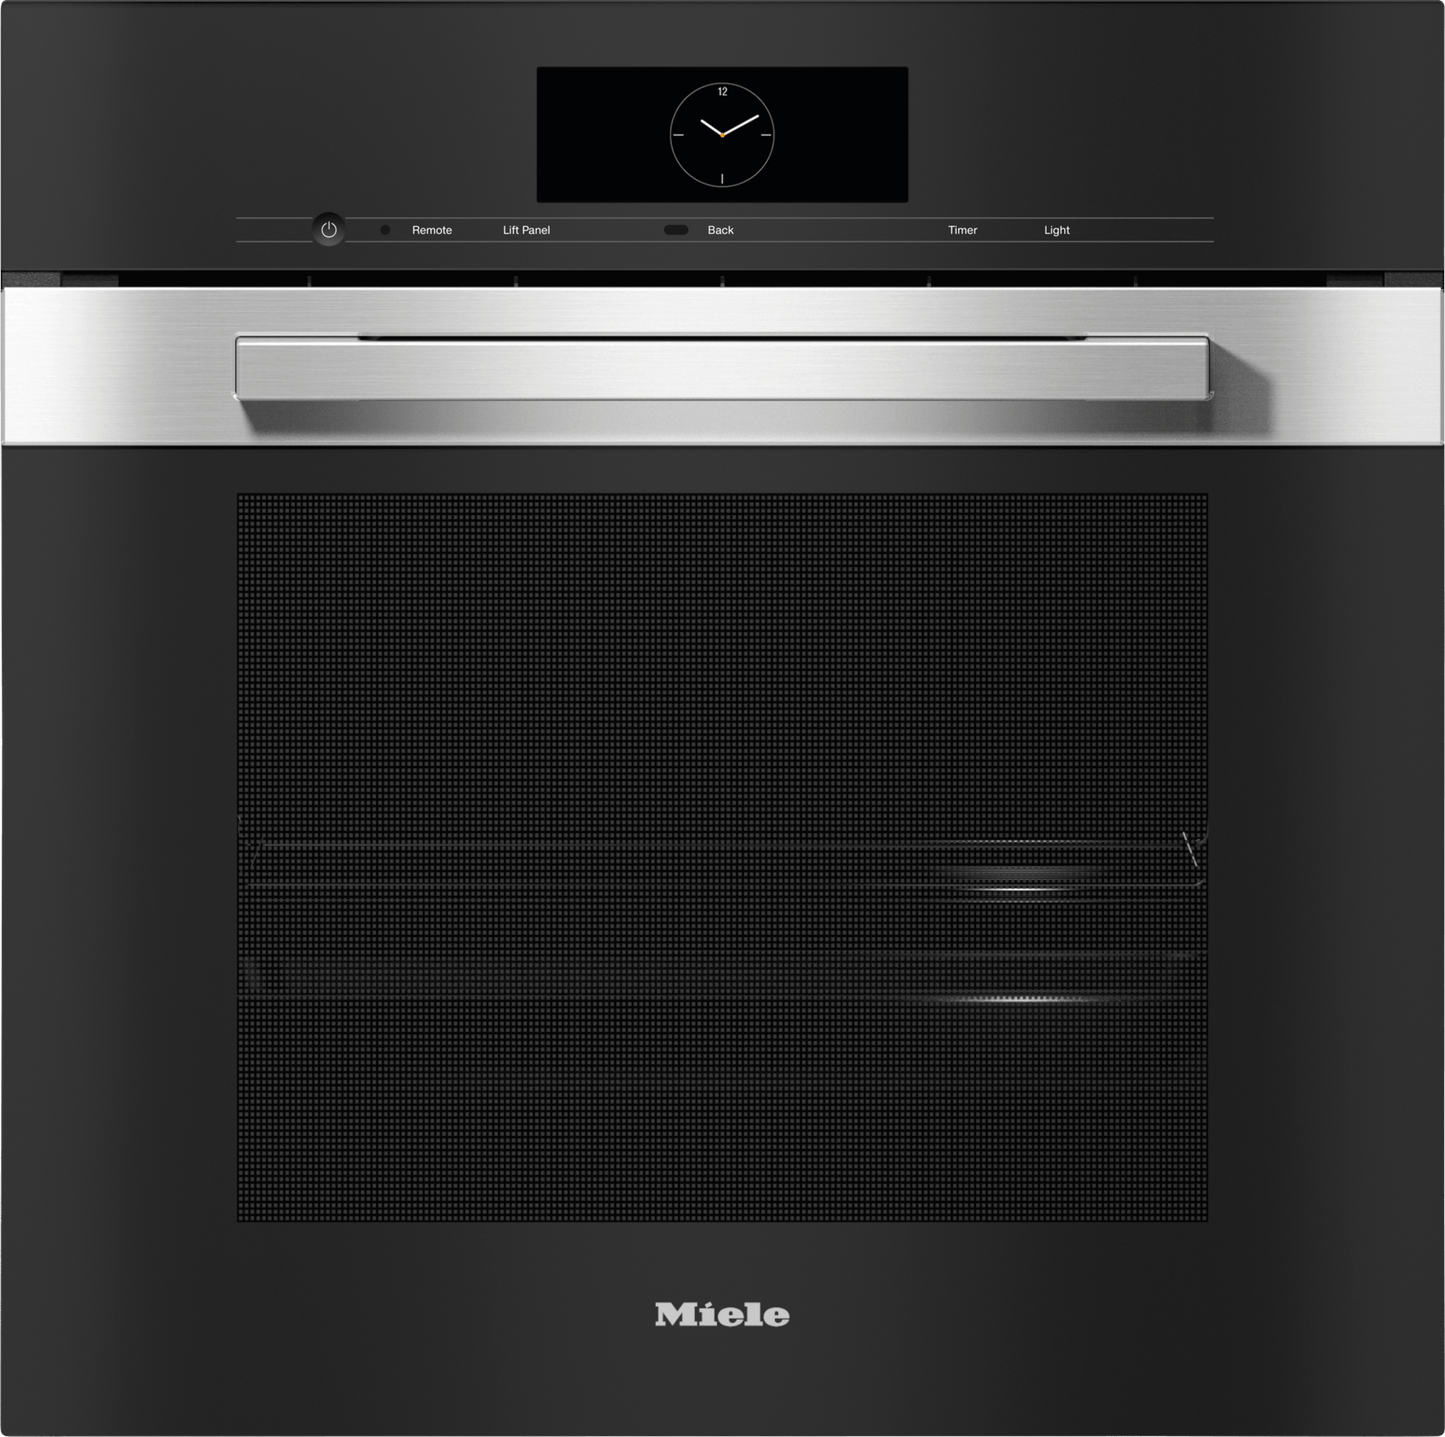 Miele DGC7860AMCLEANTOUCHSTEEL Dgc 7860 Am - 24" Combi-Steam Oven Xxl For Steam Cooking, Baking, Roasting With Roast Probe + Menu Cooking.